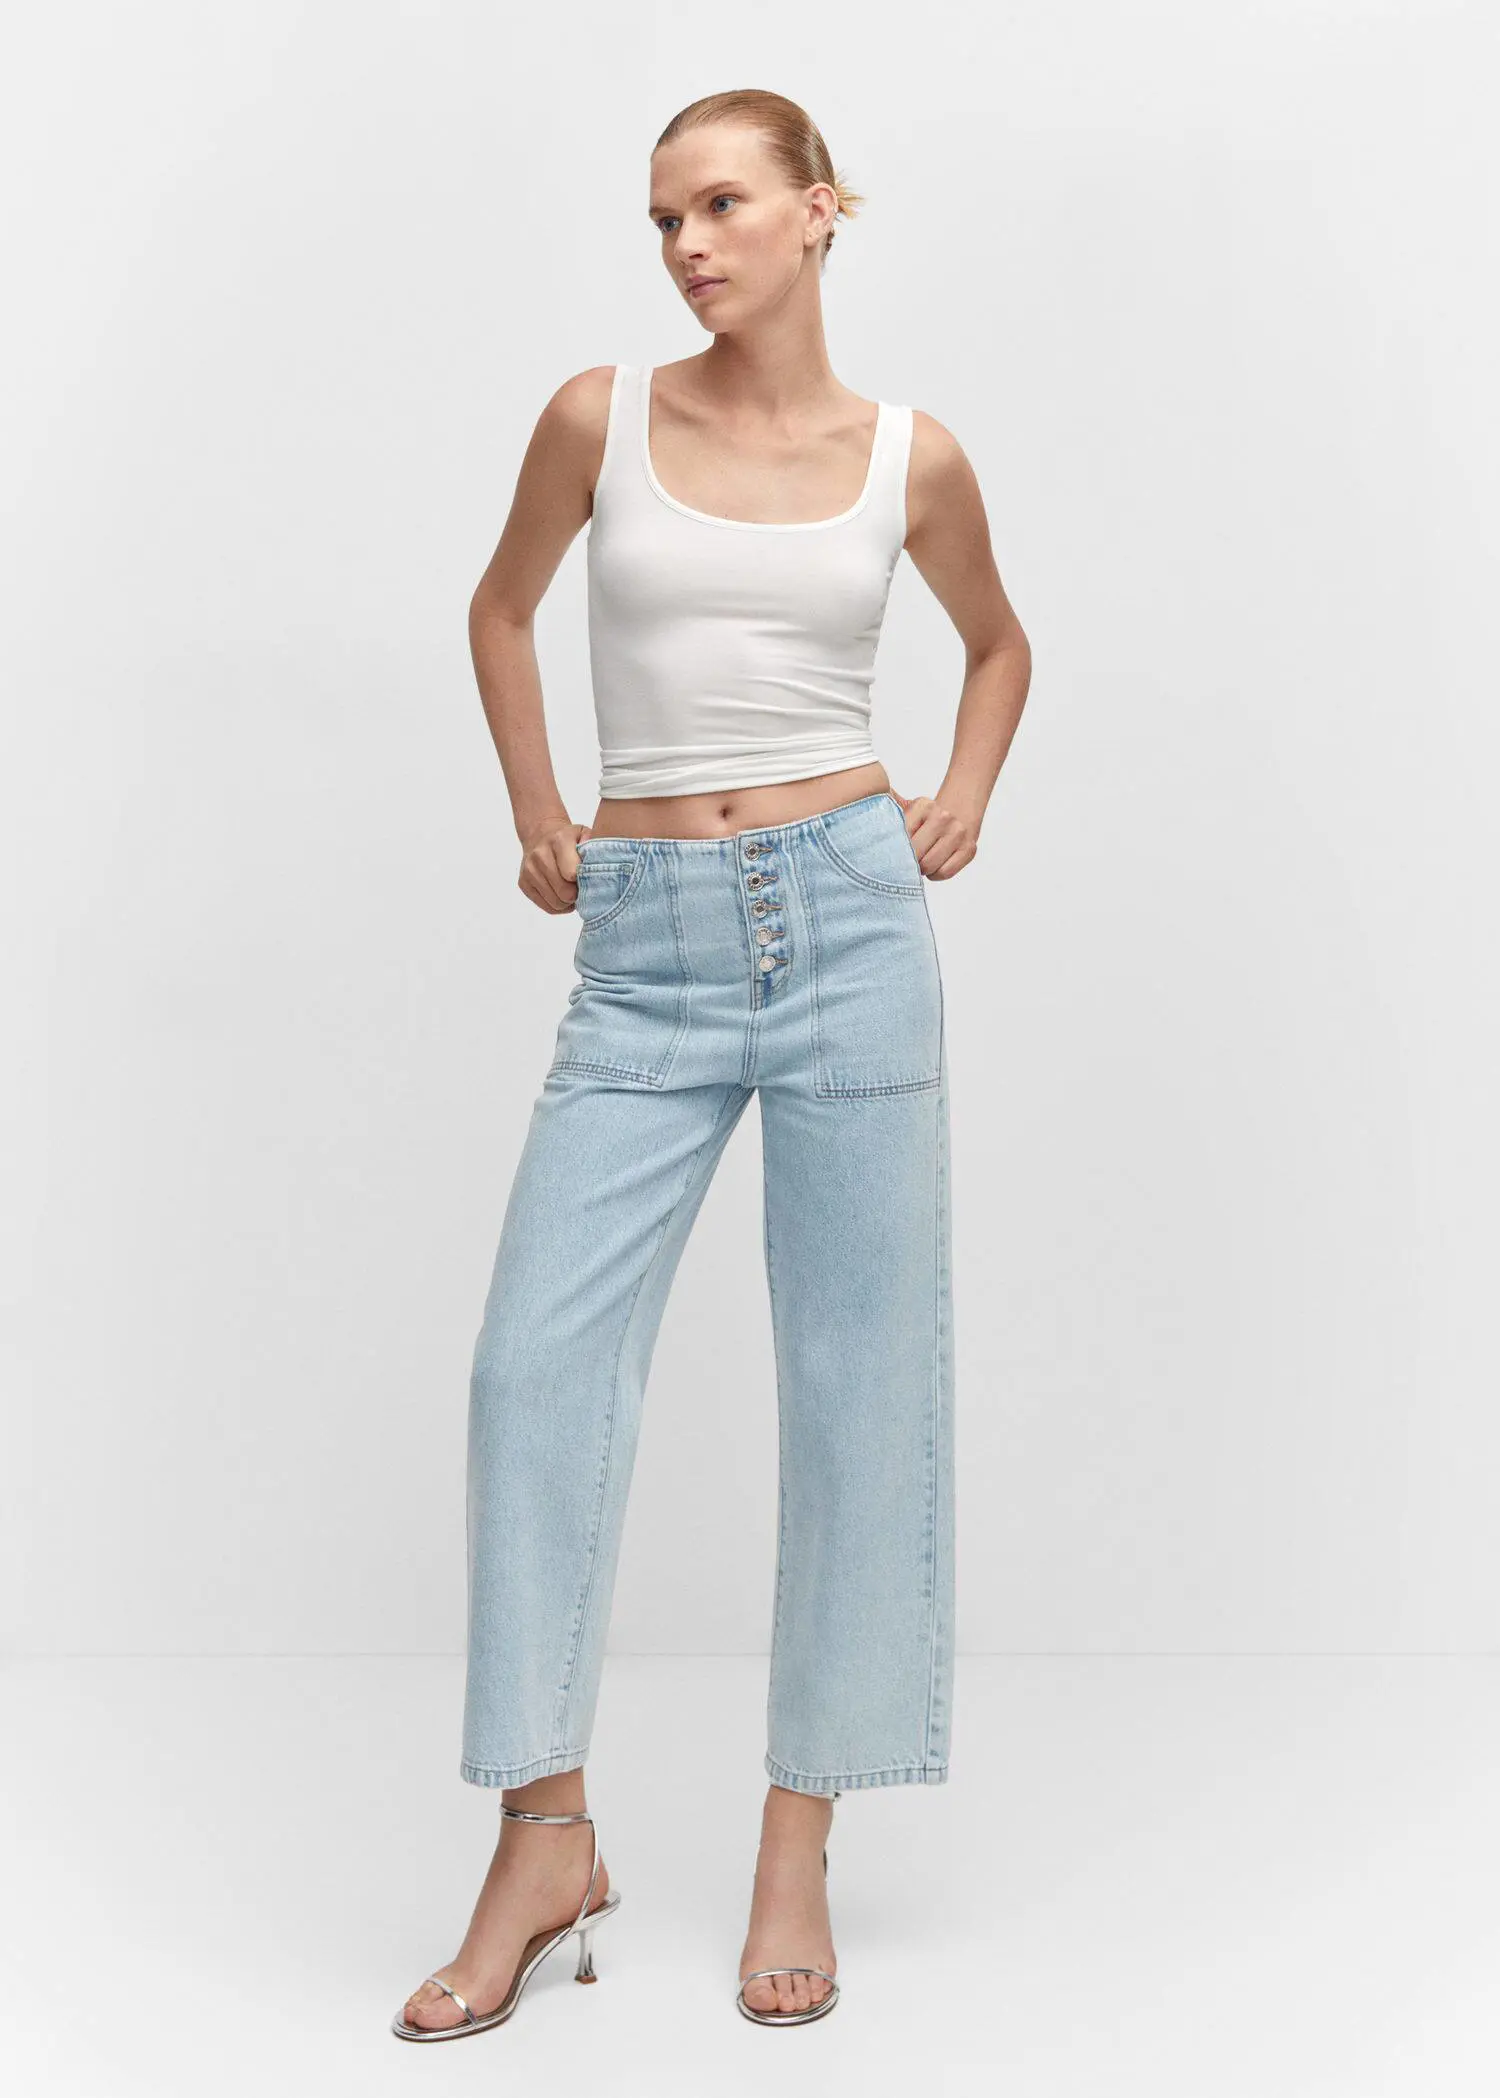 Mango Cropped straight-leg jeans with buttons. a woman in a white tank top and light blue jeans. 